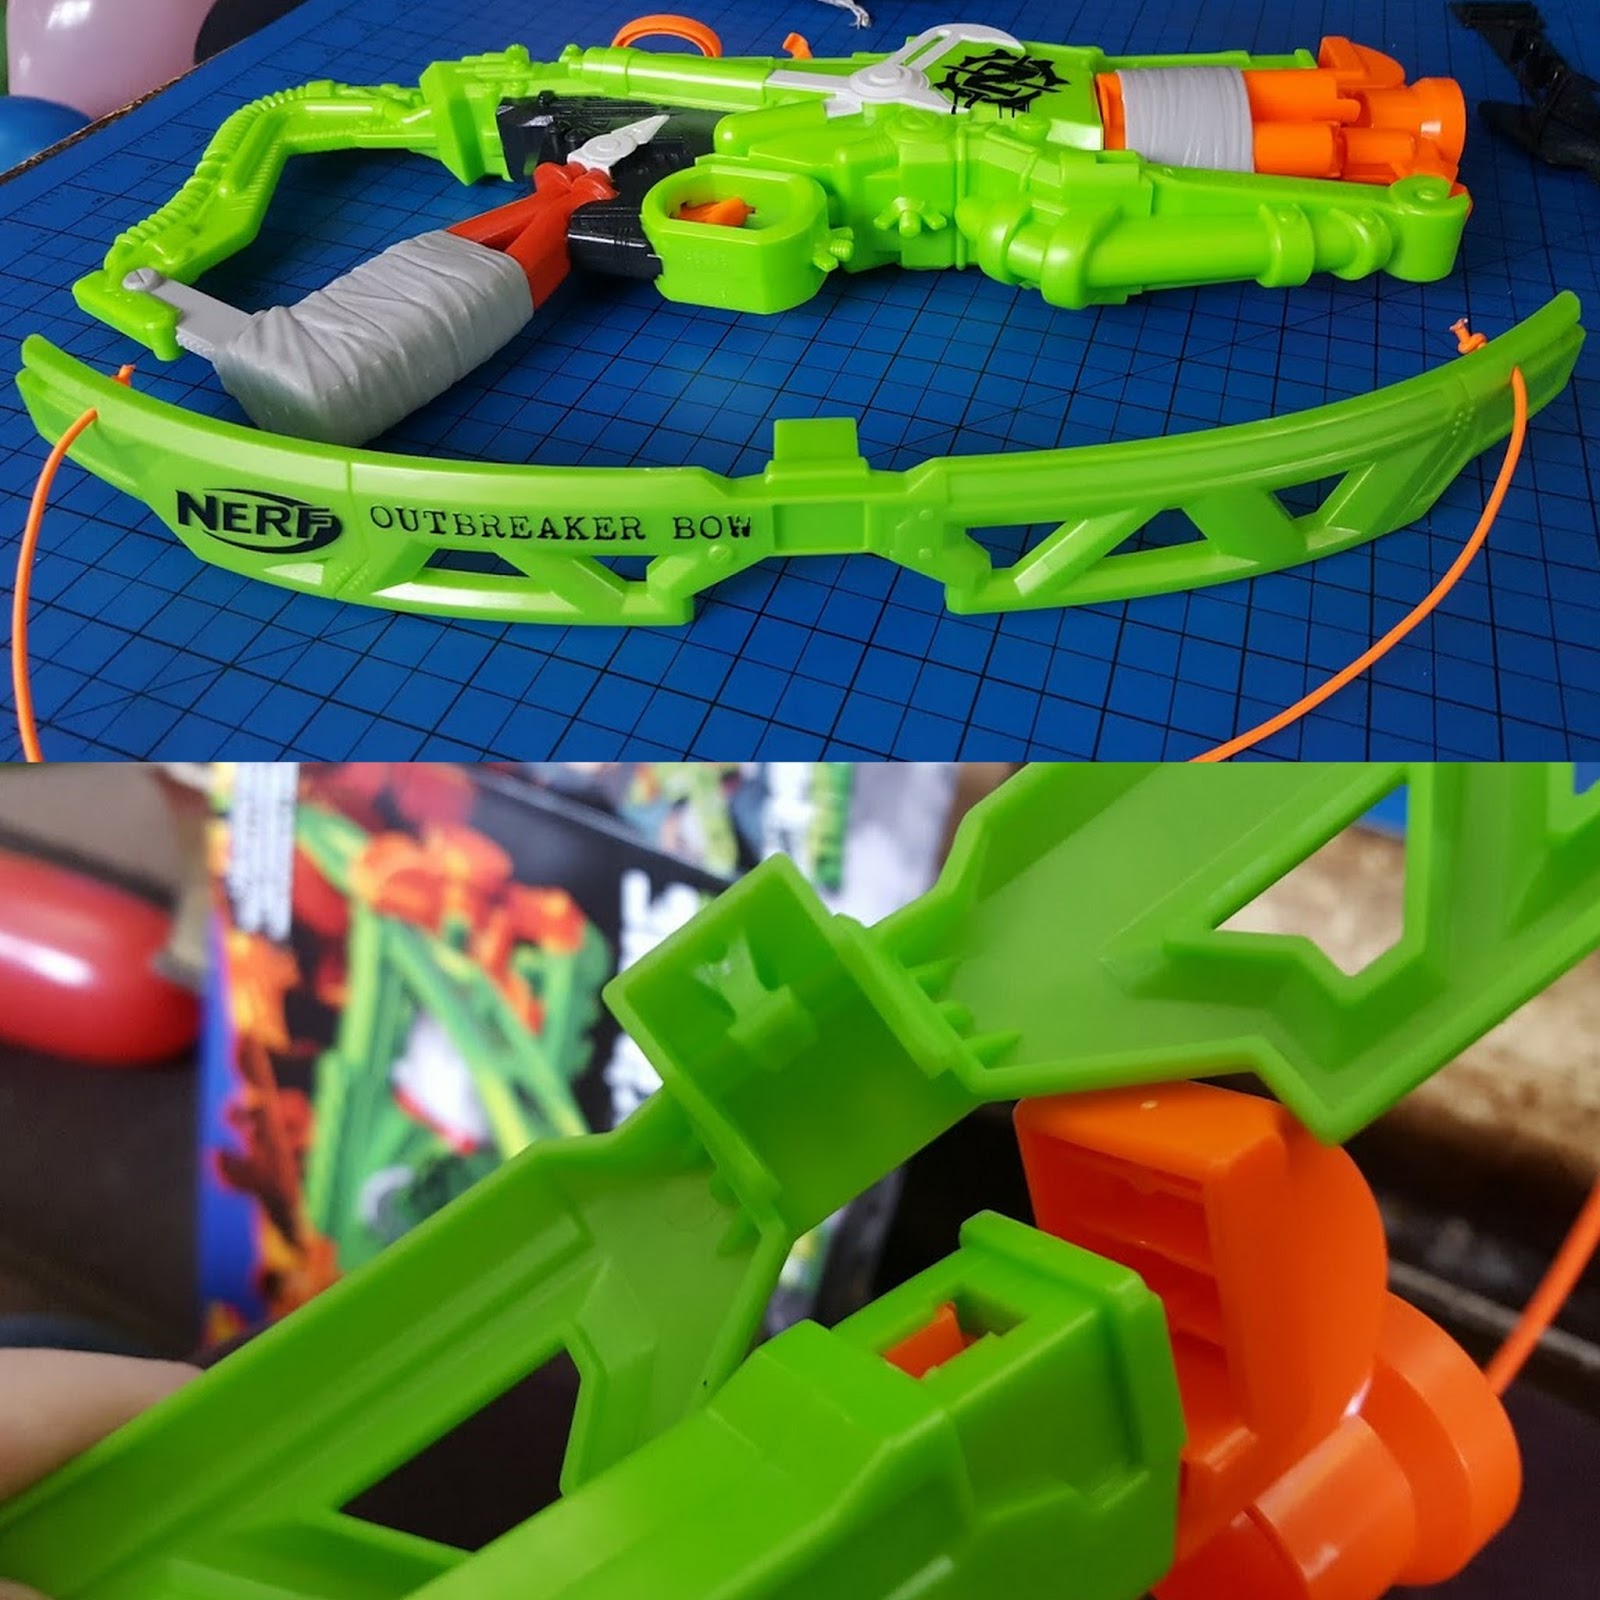 Dovenskab Gøre en indsats sti The Brick Castle: Nerf Zombie Strike Outbreaker Bow review (age 8+)